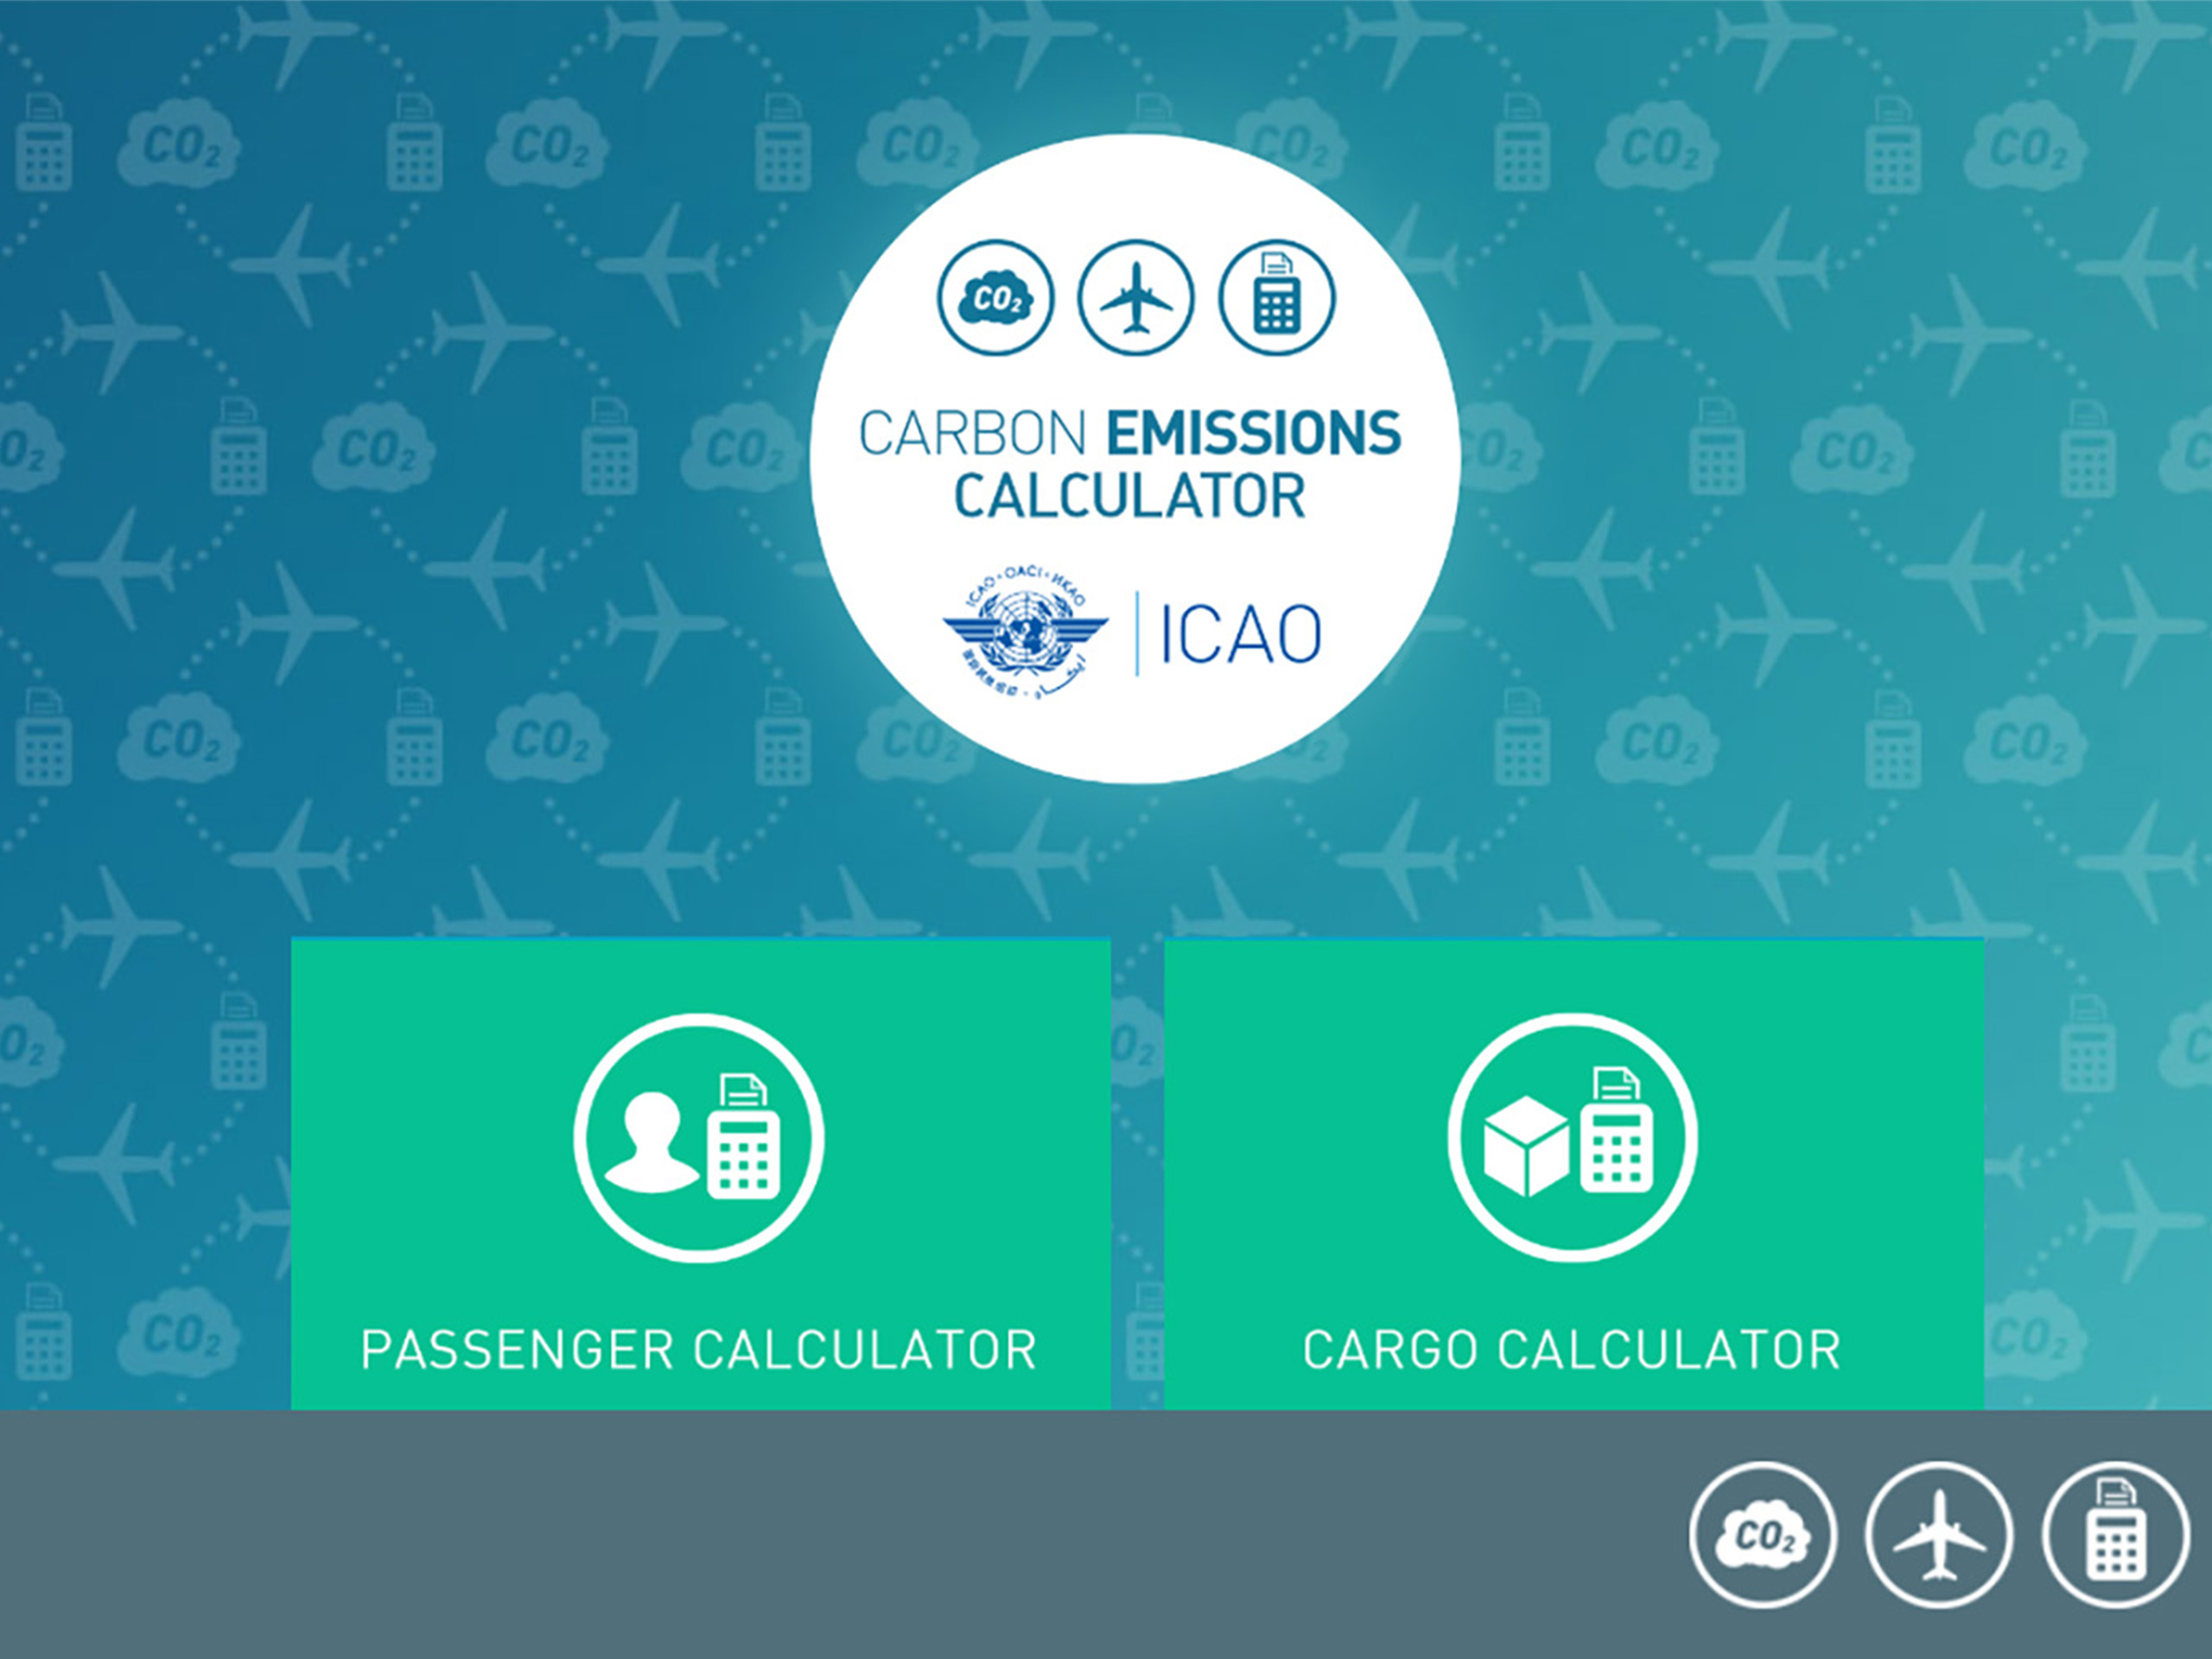 ICAO Carbon Emissions Calculator